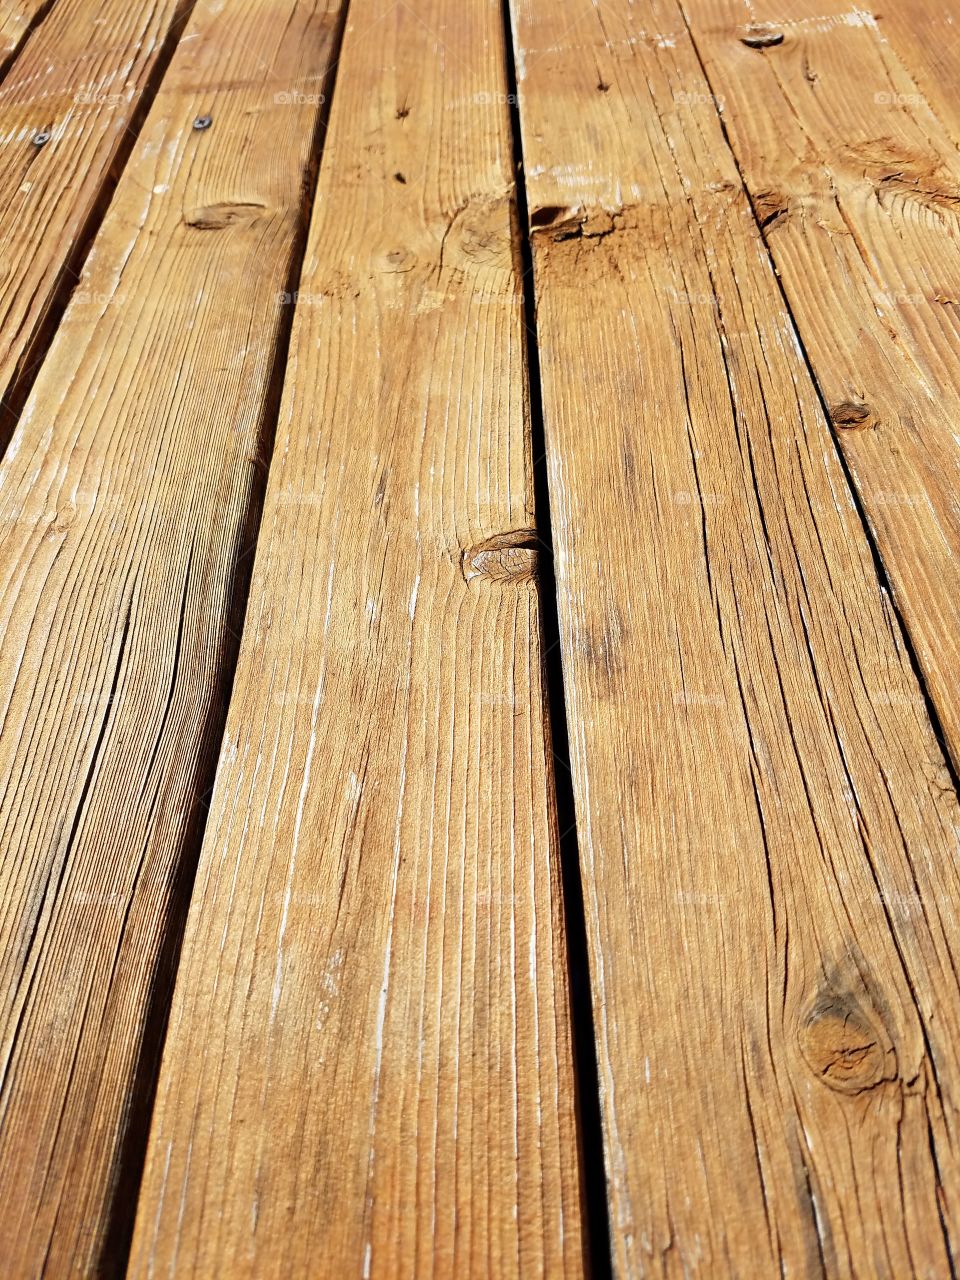 some soothing pics of wood